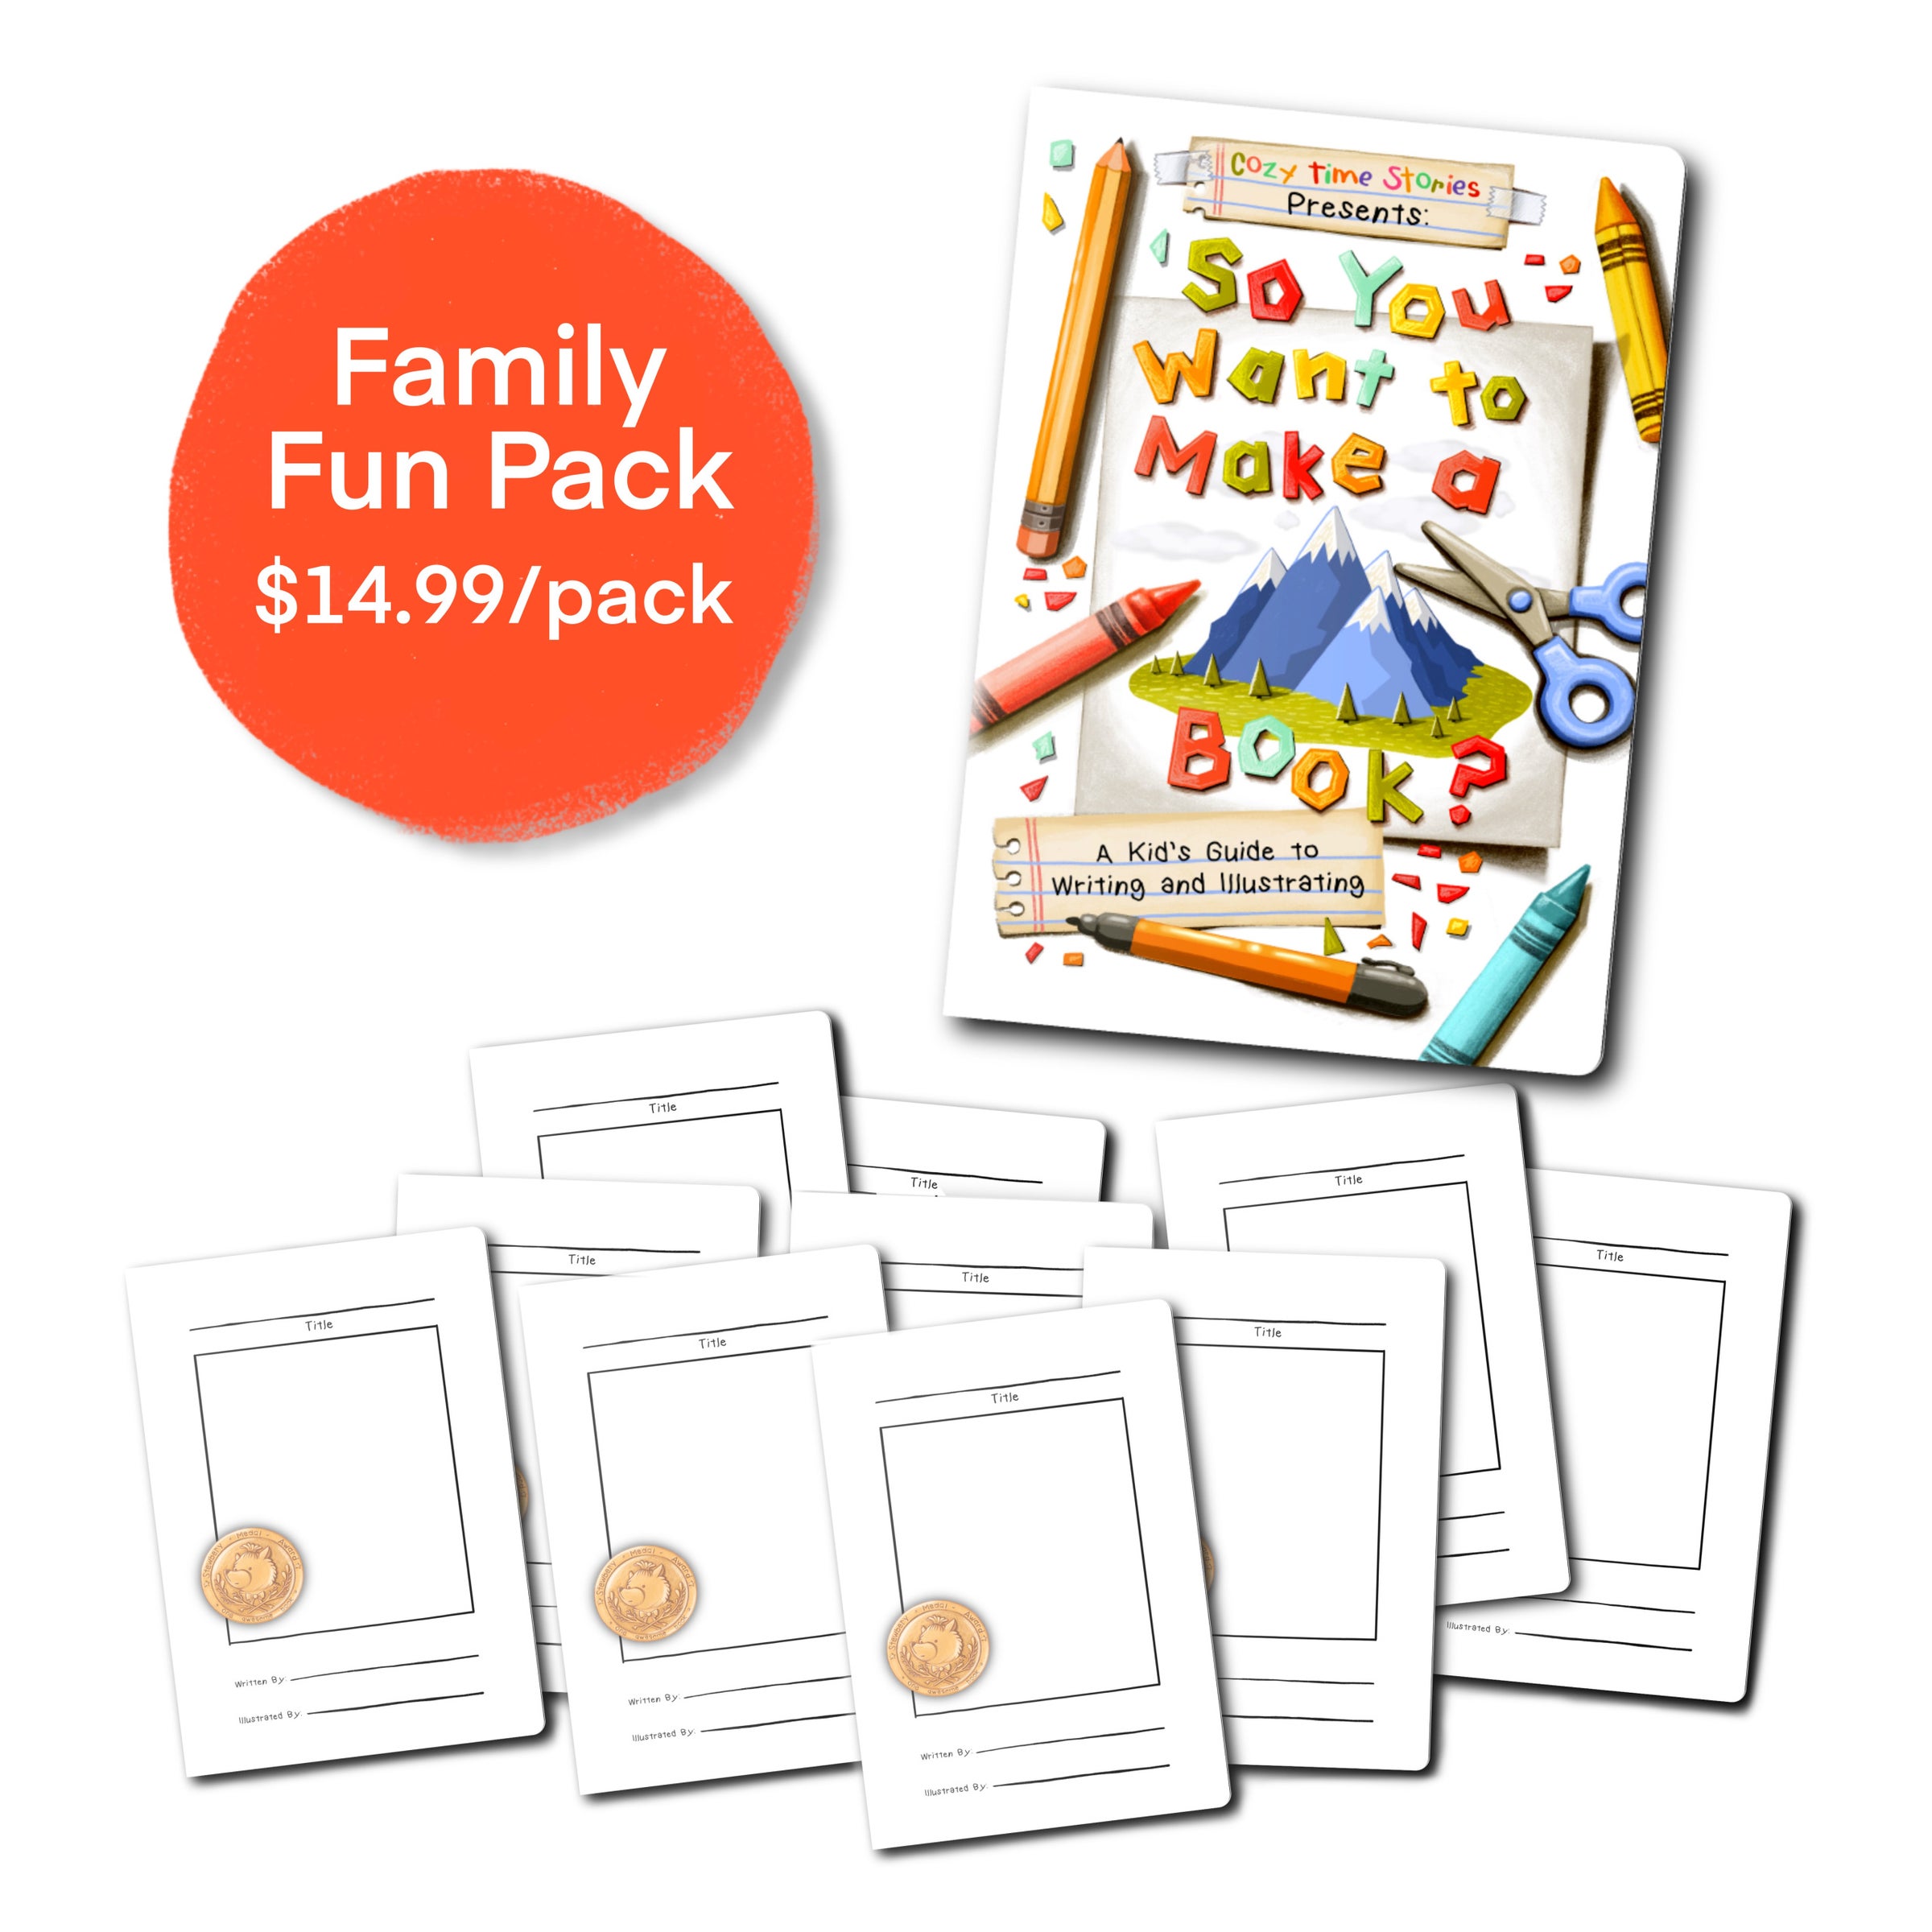 Family Fun Pack- 1 Workbook and 10 Blank Books - $14.99 each